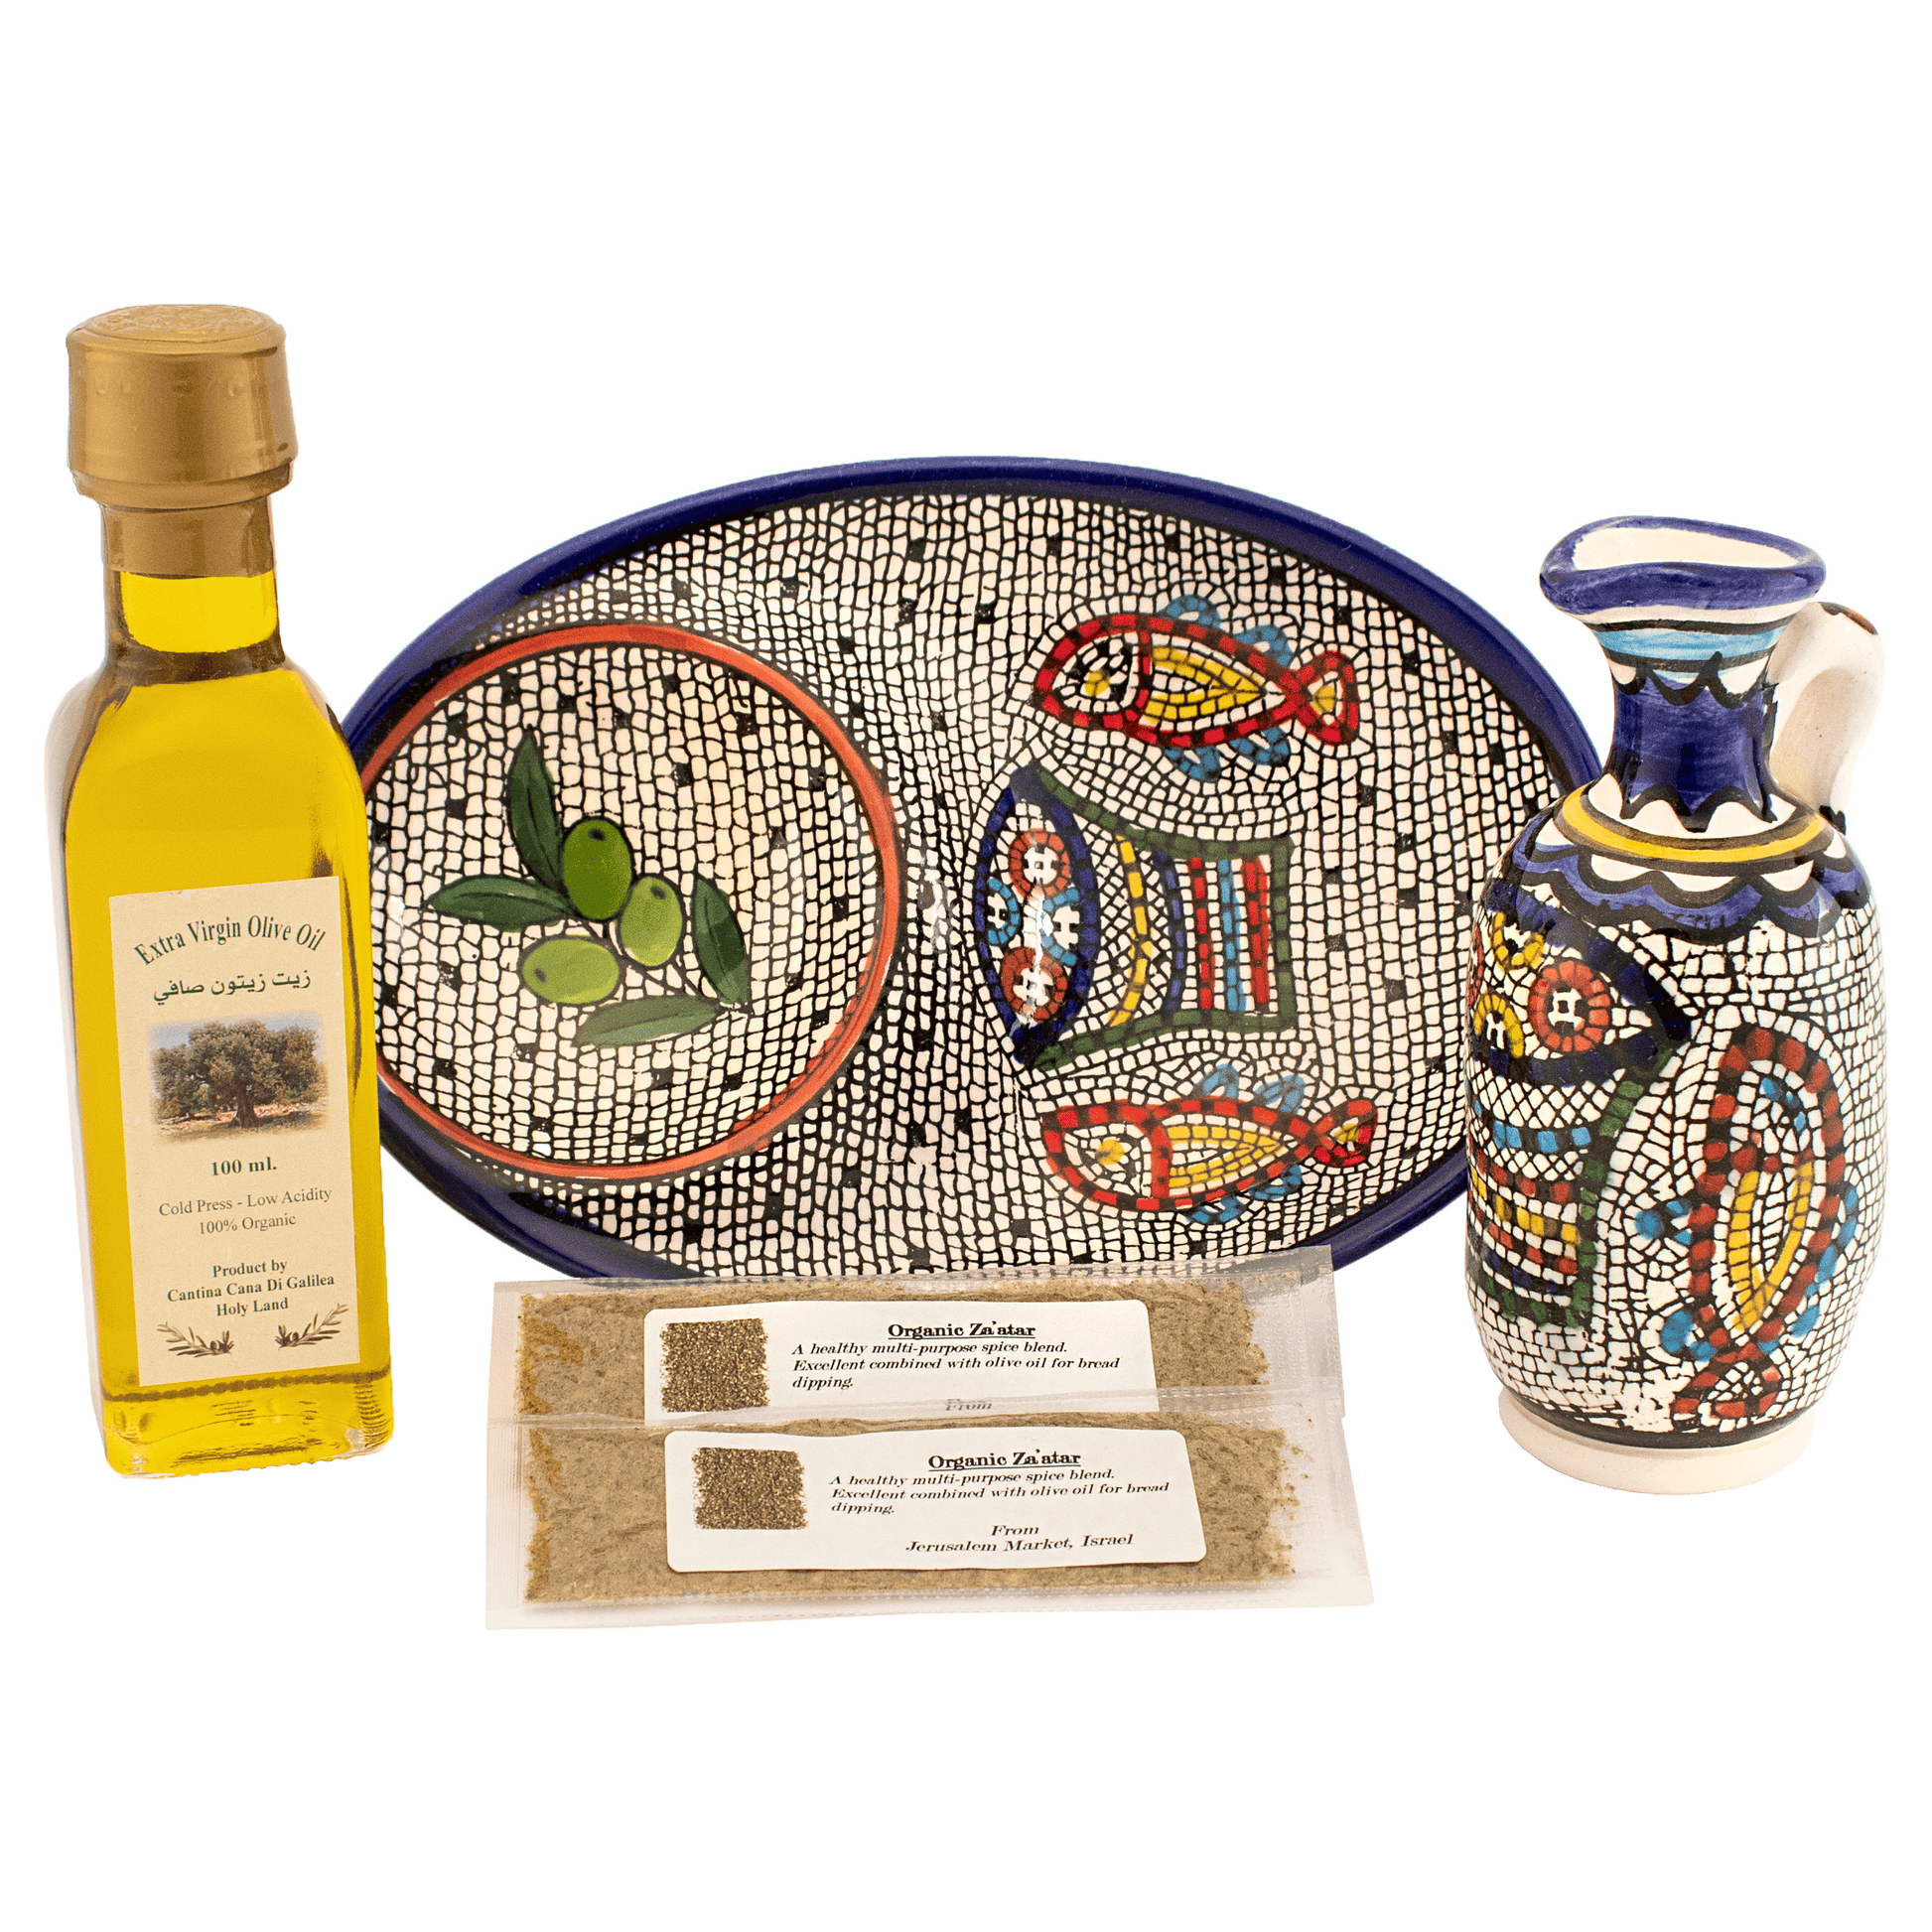 Armenian Dipping dish set with Fish and Loves and olive branch designs, olive oil, and 2 sample Za'atar spice packets